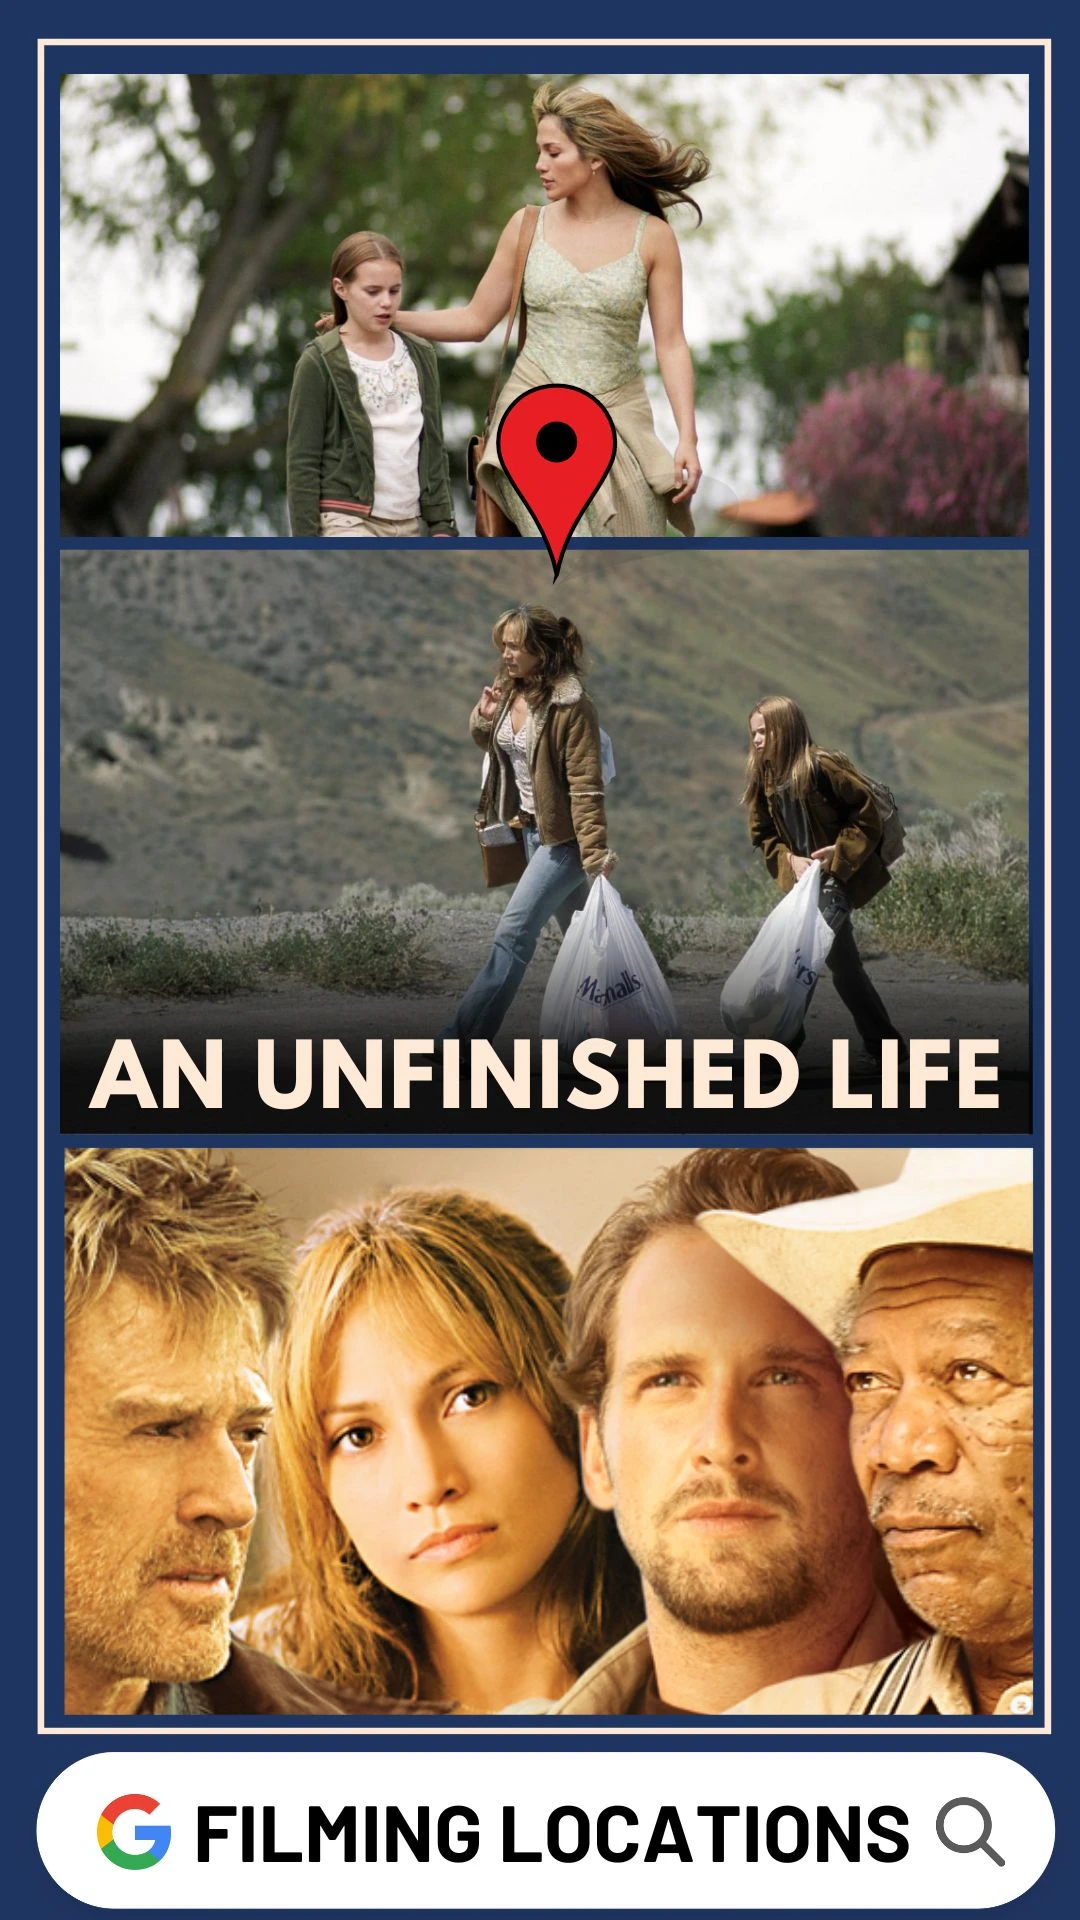 Discover the Famous Canadian Locations where the 2005 Film An Unfinished Life was Filmed